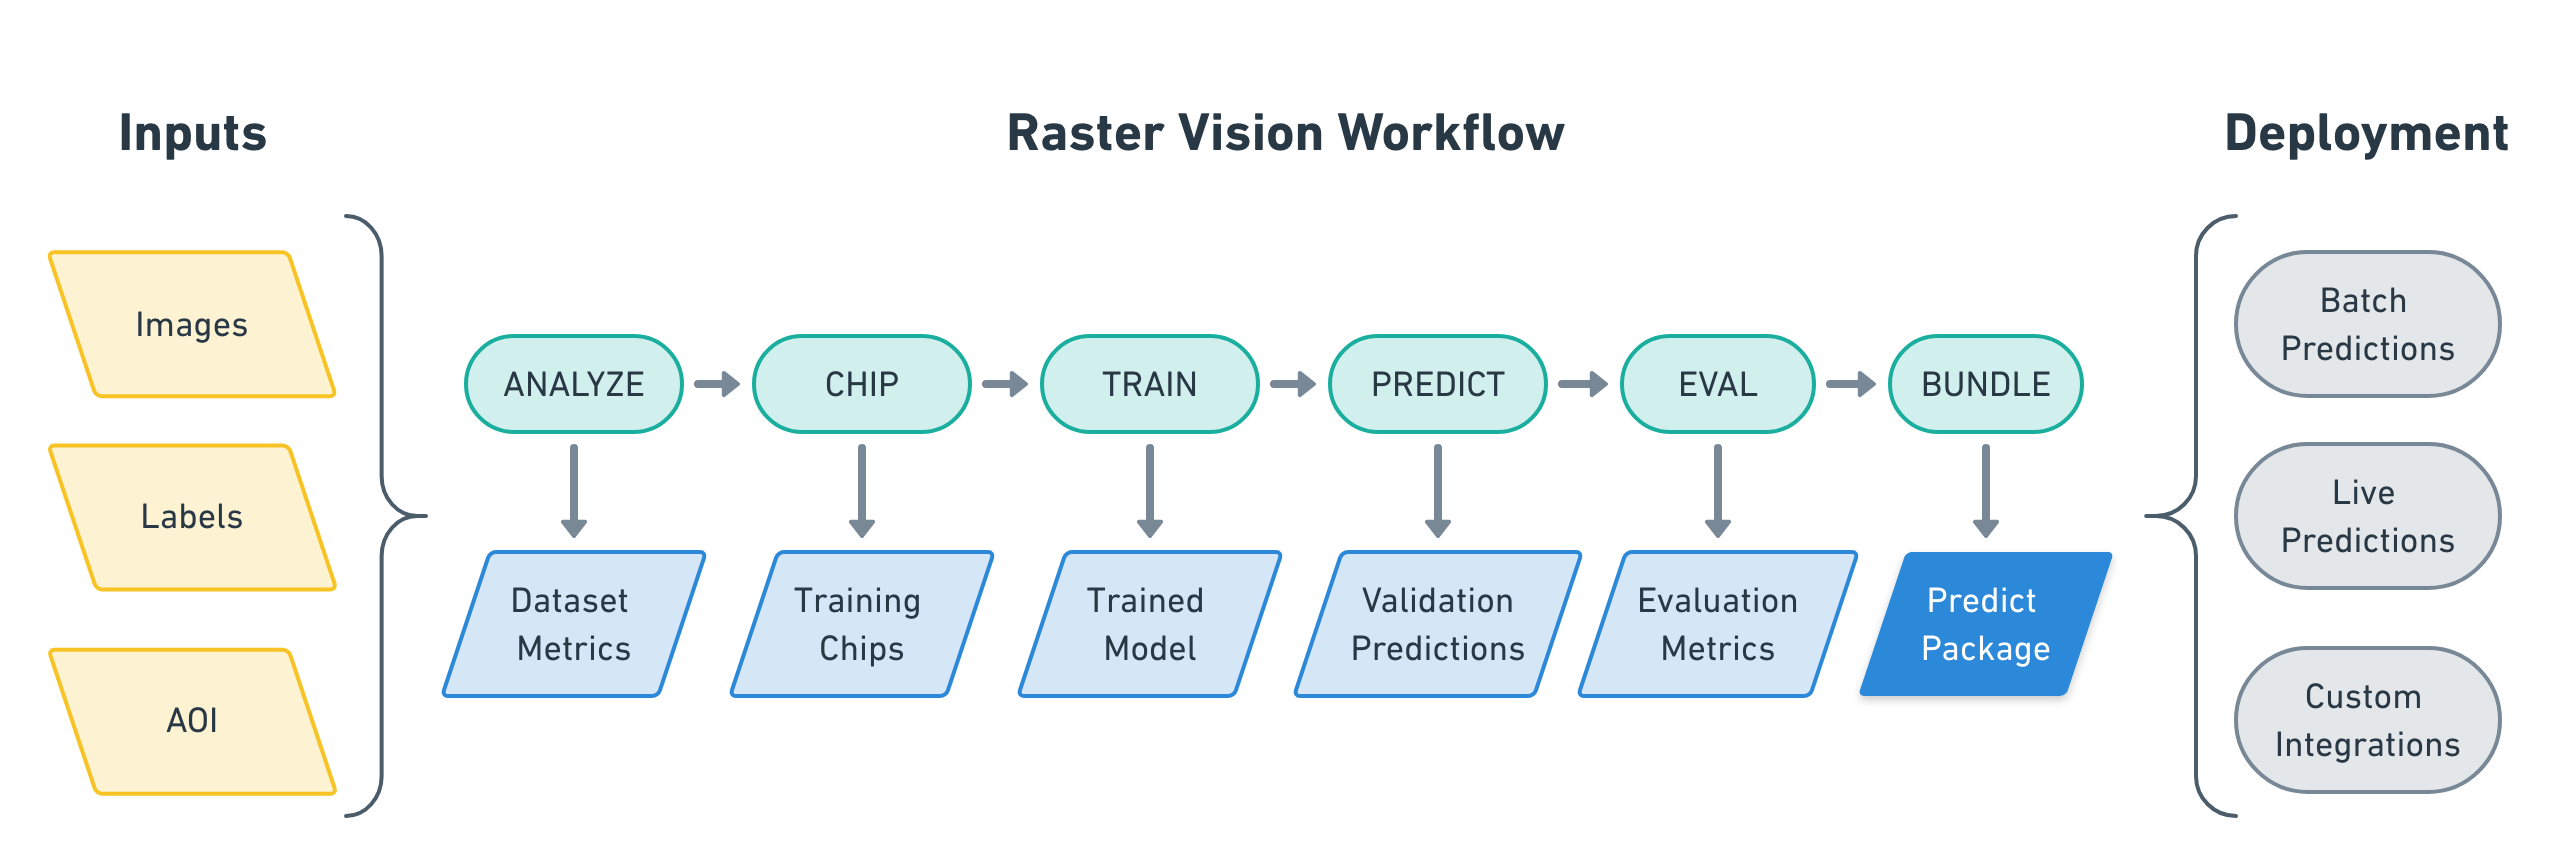 Overview of Raster Vision workflow